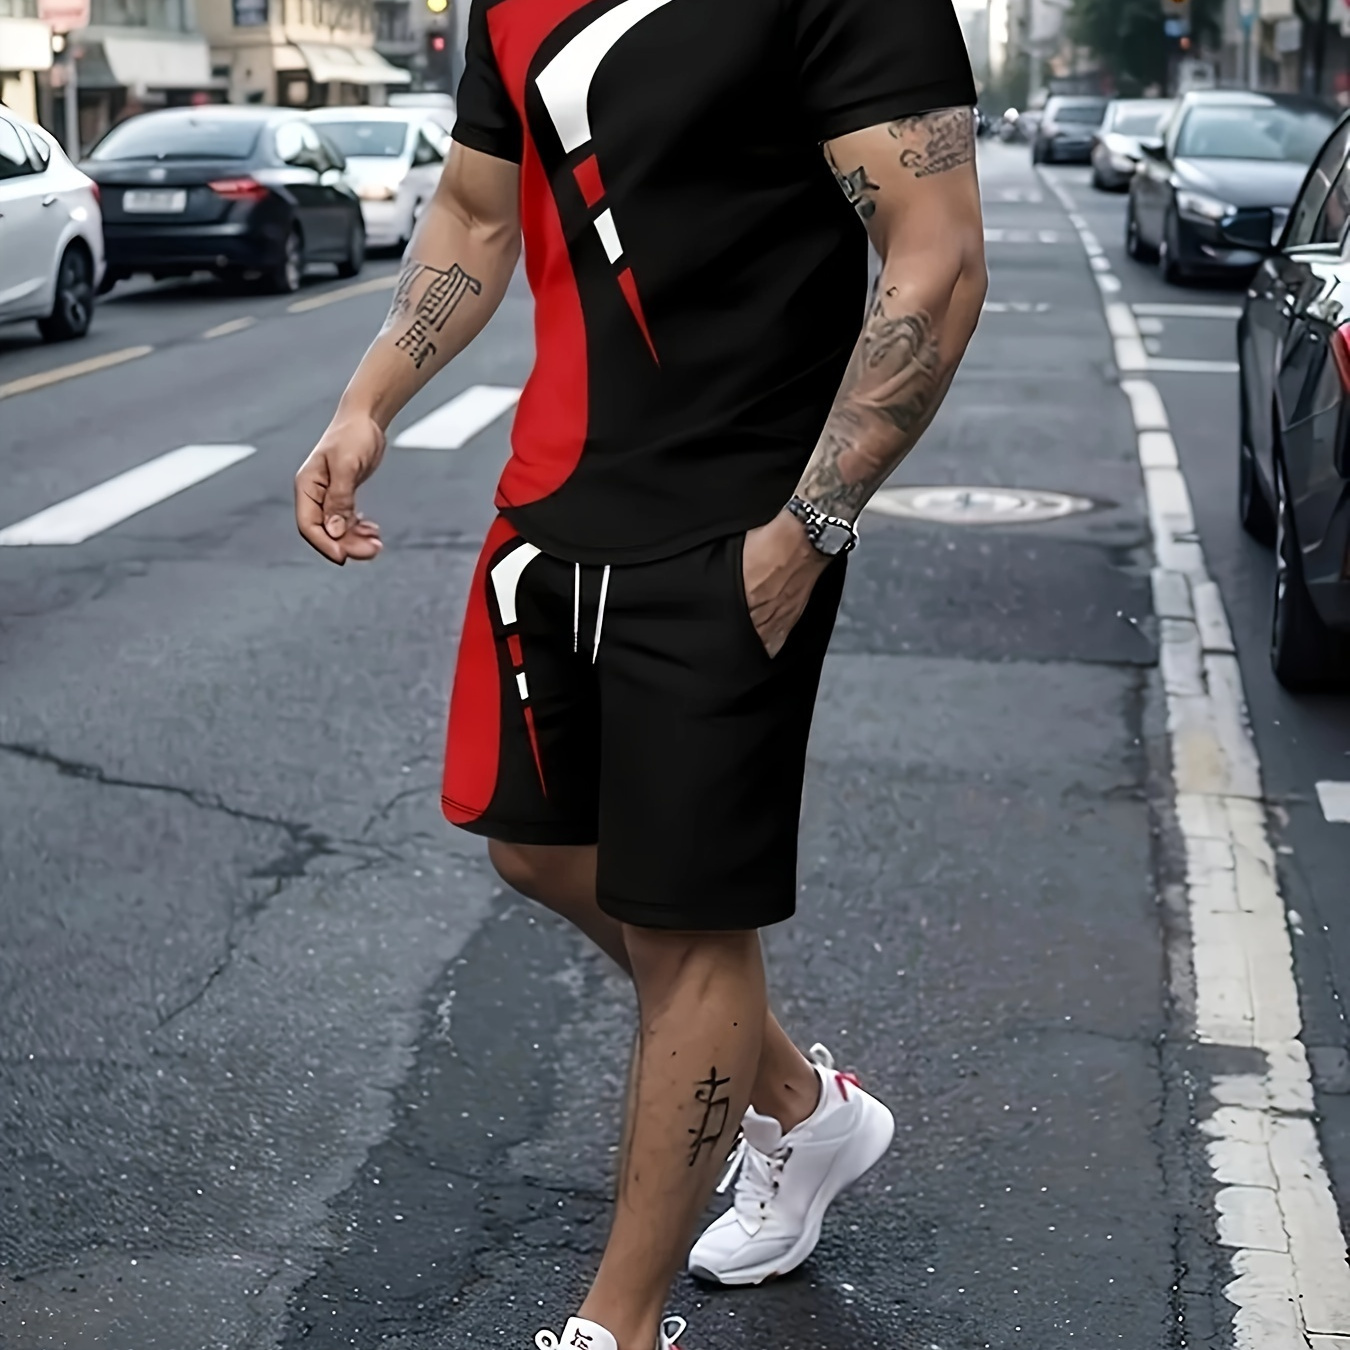 

Plus Size 2-piece Men's Fashion Pattern Short Sleeved Round Neck T-shirt And Drawstring Shorts Set, Casual Street Comfortable And Breathable, Black And Red Oversized Men's Clothing